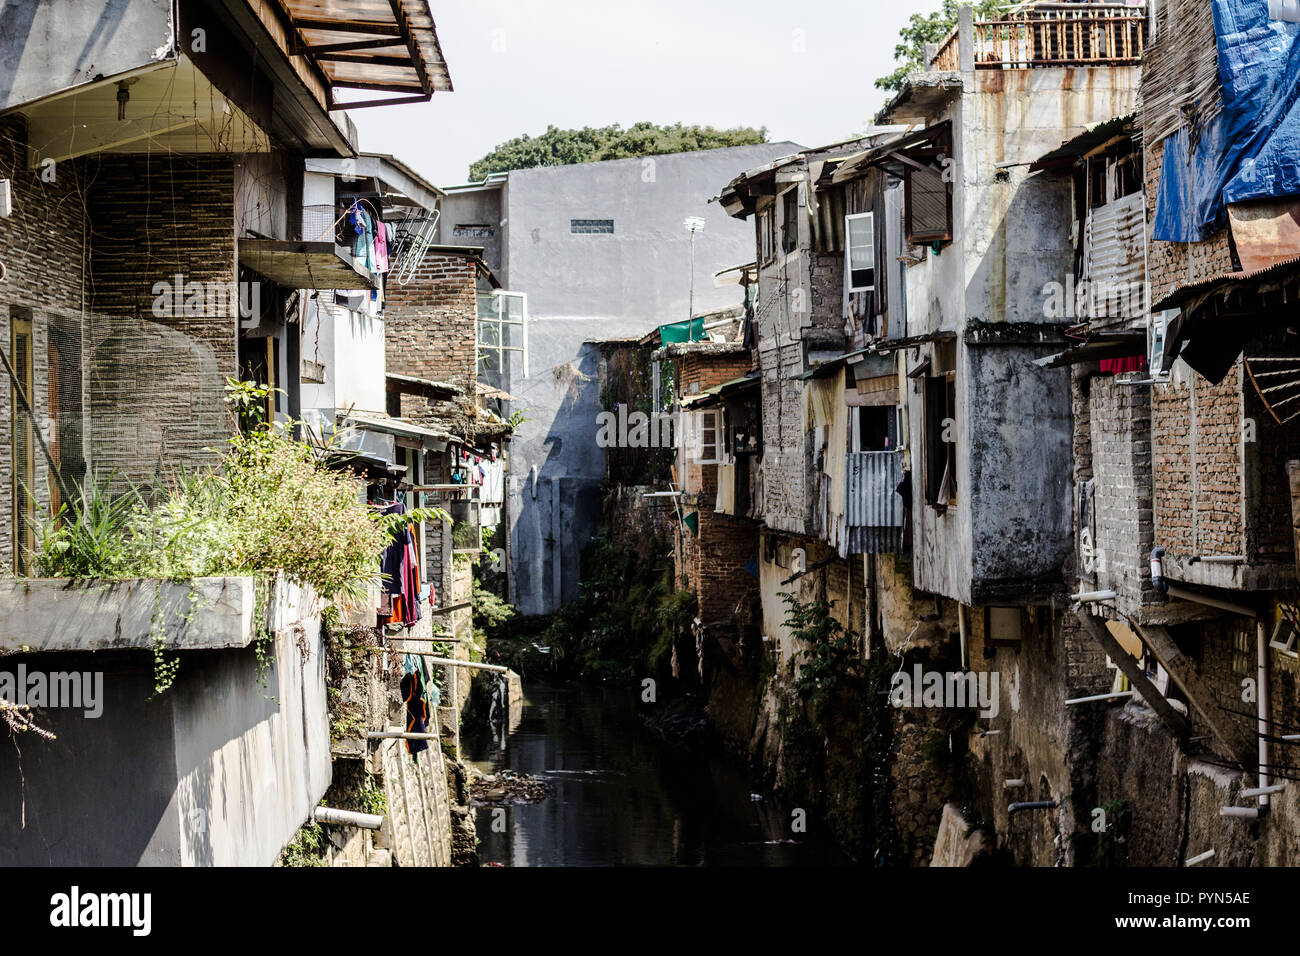 this is a residential area on the edge of the river Stock Photo